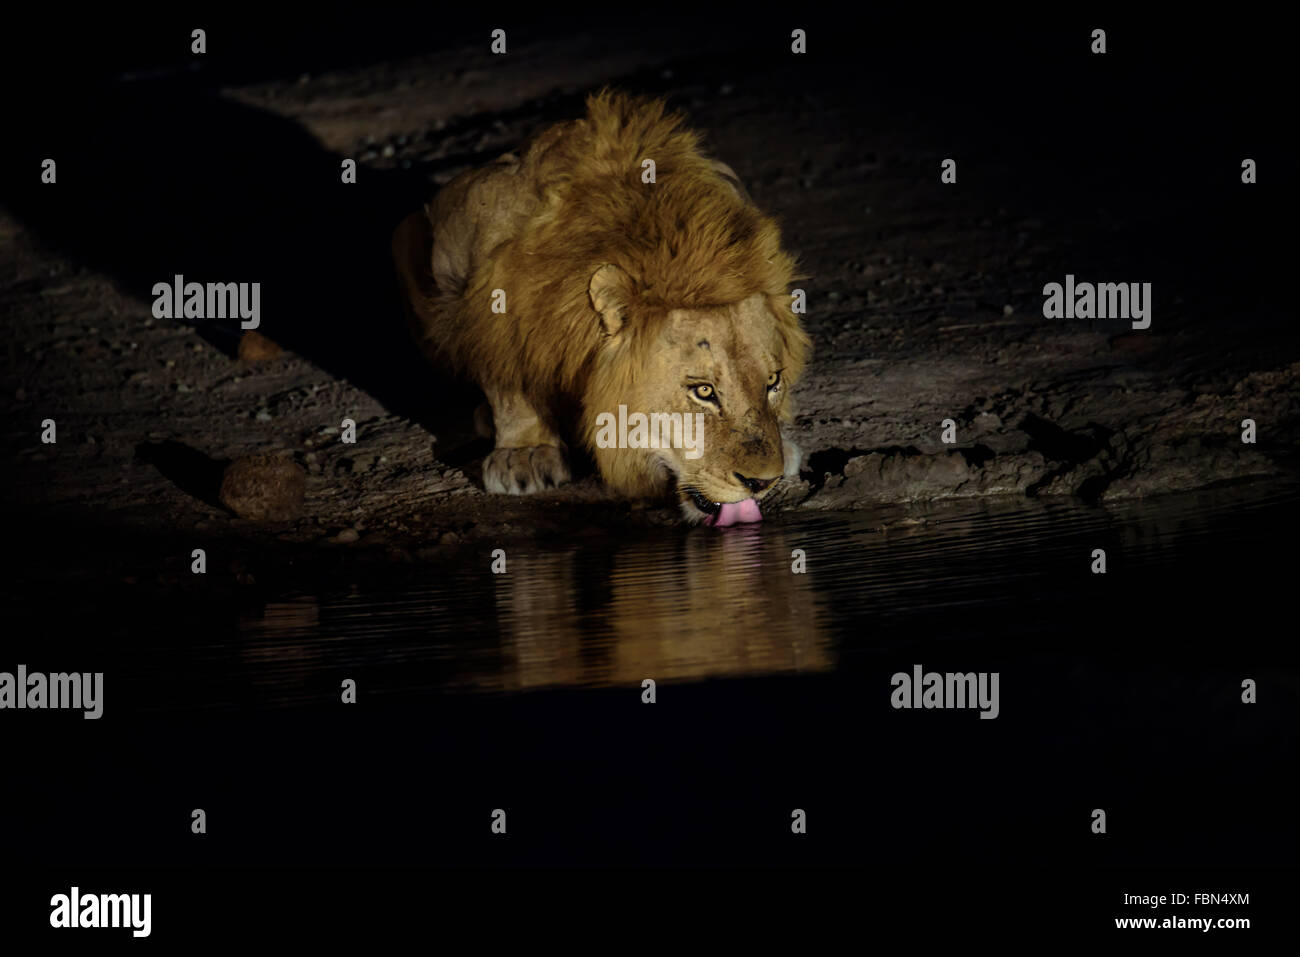 Male Lion drinking at a waterhole at night Stock Photo